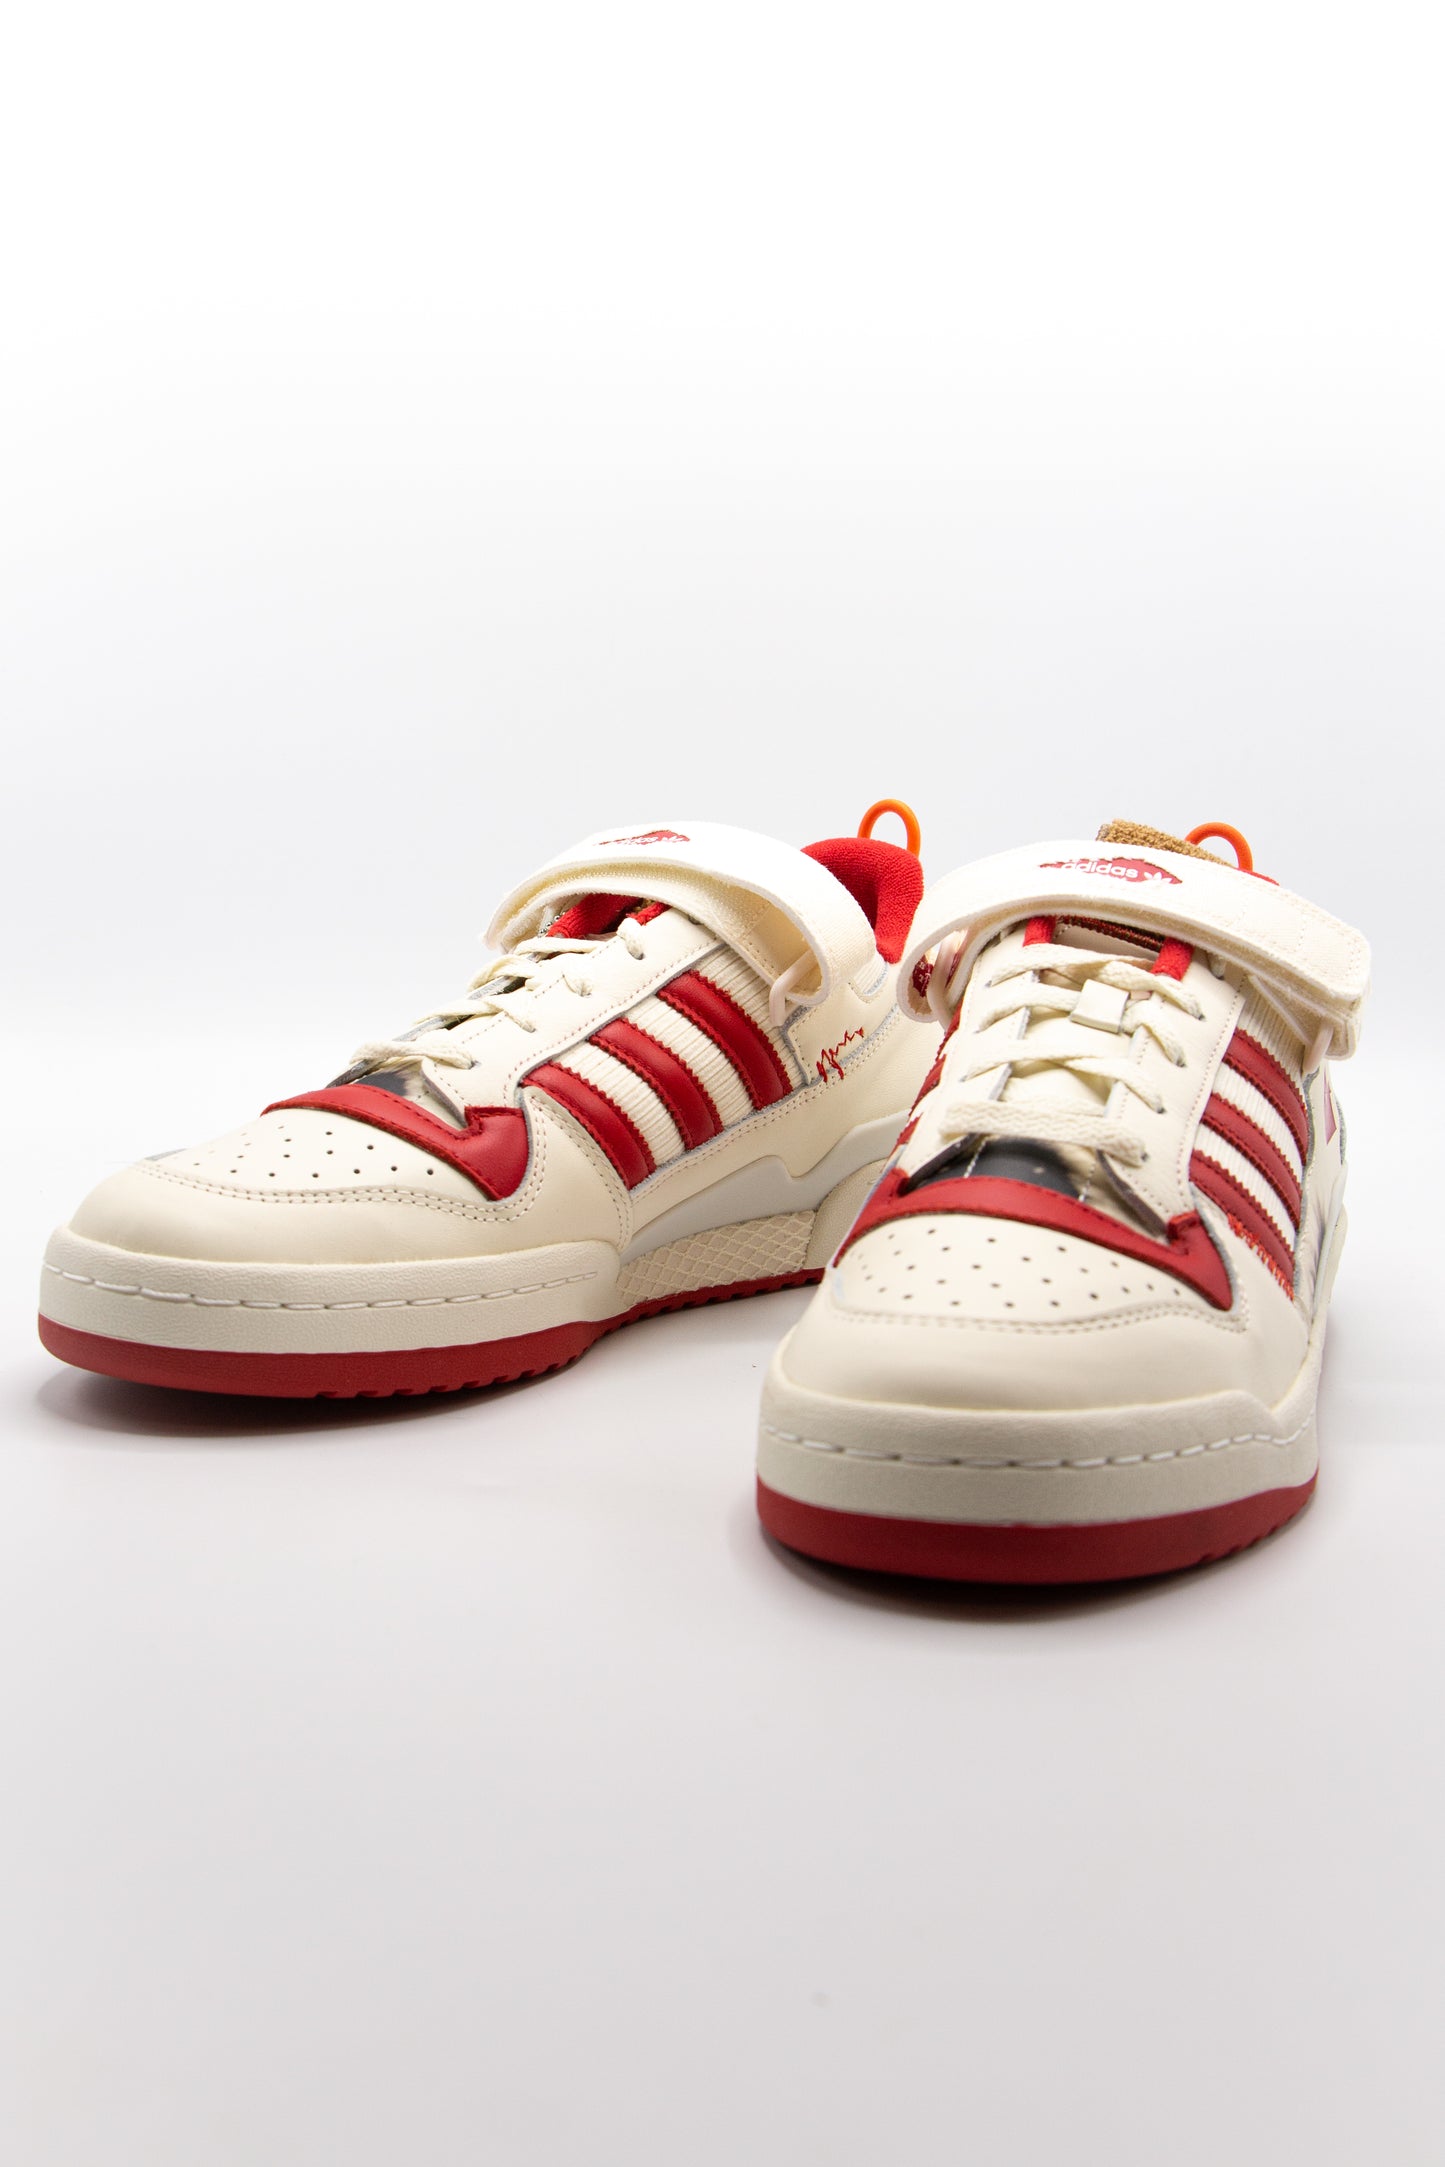 Adidas Forum Low Home Alone Sneaker